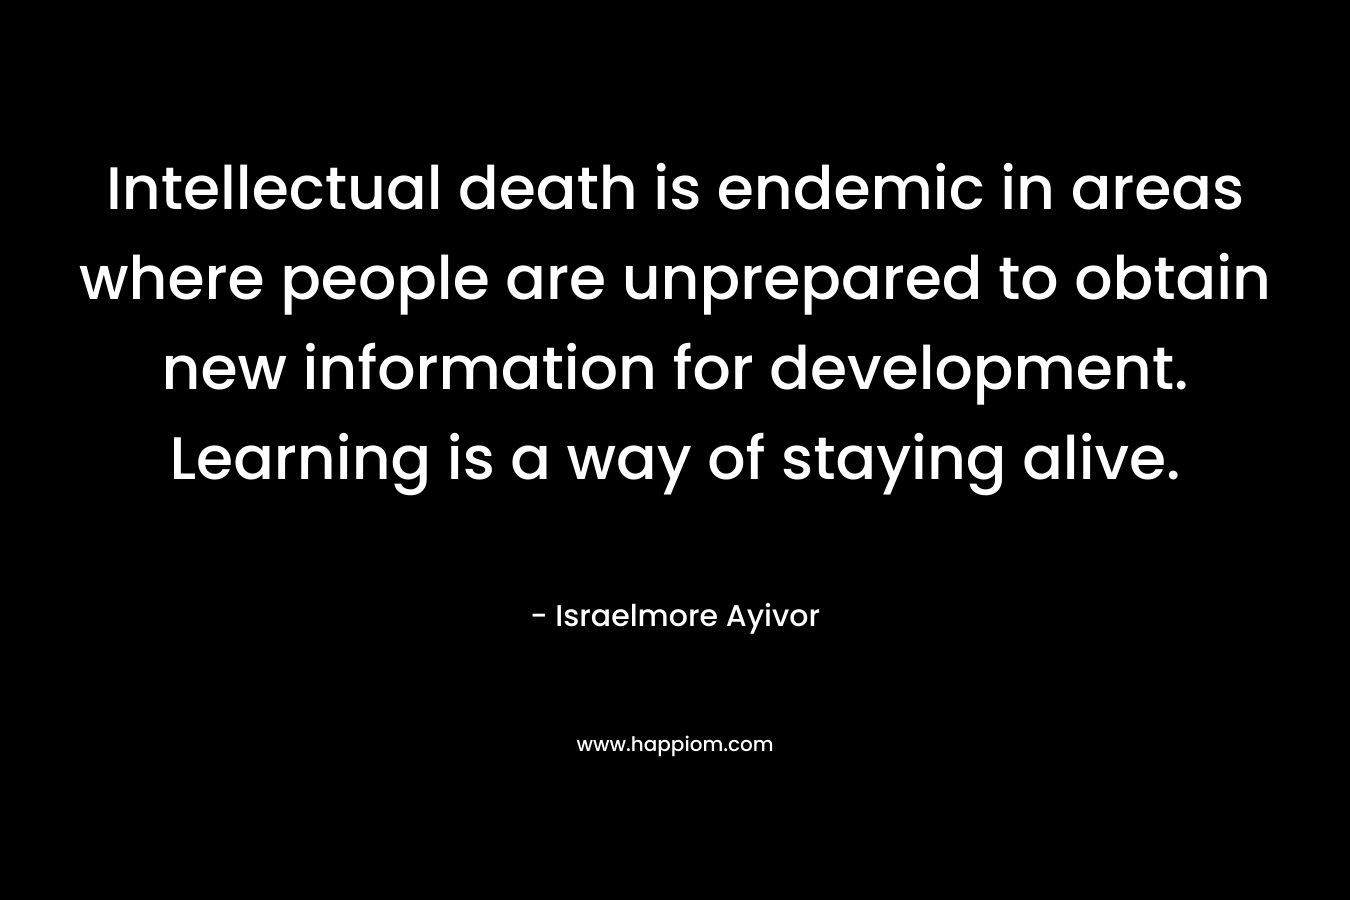 Intellectual death is endemic in areas where people are unprepared to obtain new information for development. Learning is a way of staying alive.